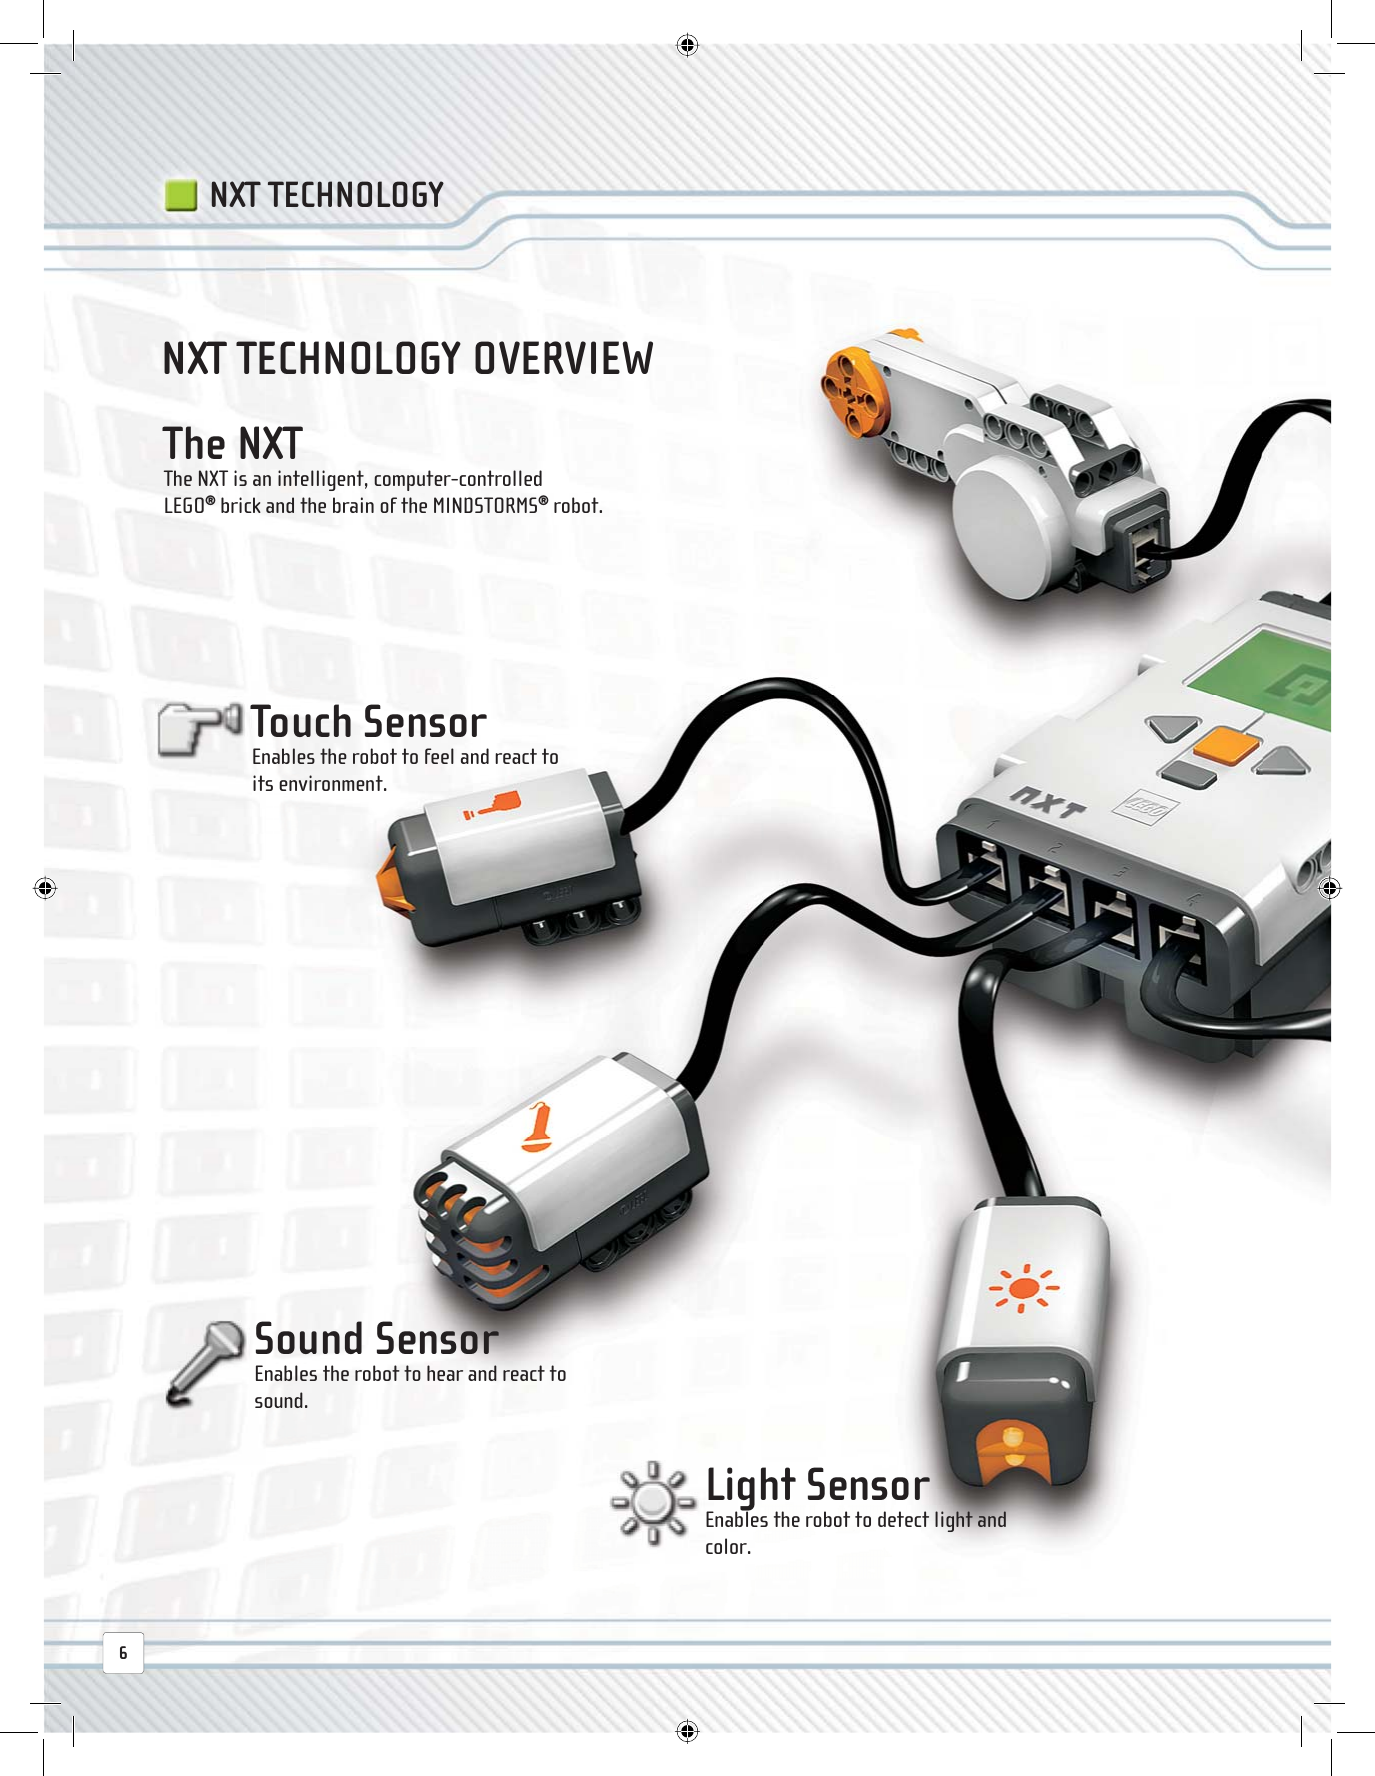  The  NXT The NXT is an intelligent, computer-controlled LEGO® brick and the brain of the MINDSTORMS® robot.NXT TECHNOLOGY OVERVIEW Sound  Sensor Enables the robot to hear and react to sound. Touch  Sensor Enables the robot to feel and react to its environment. Light  Sensor Enables the robot to detect light and color.NXT TECHNOLOGY6